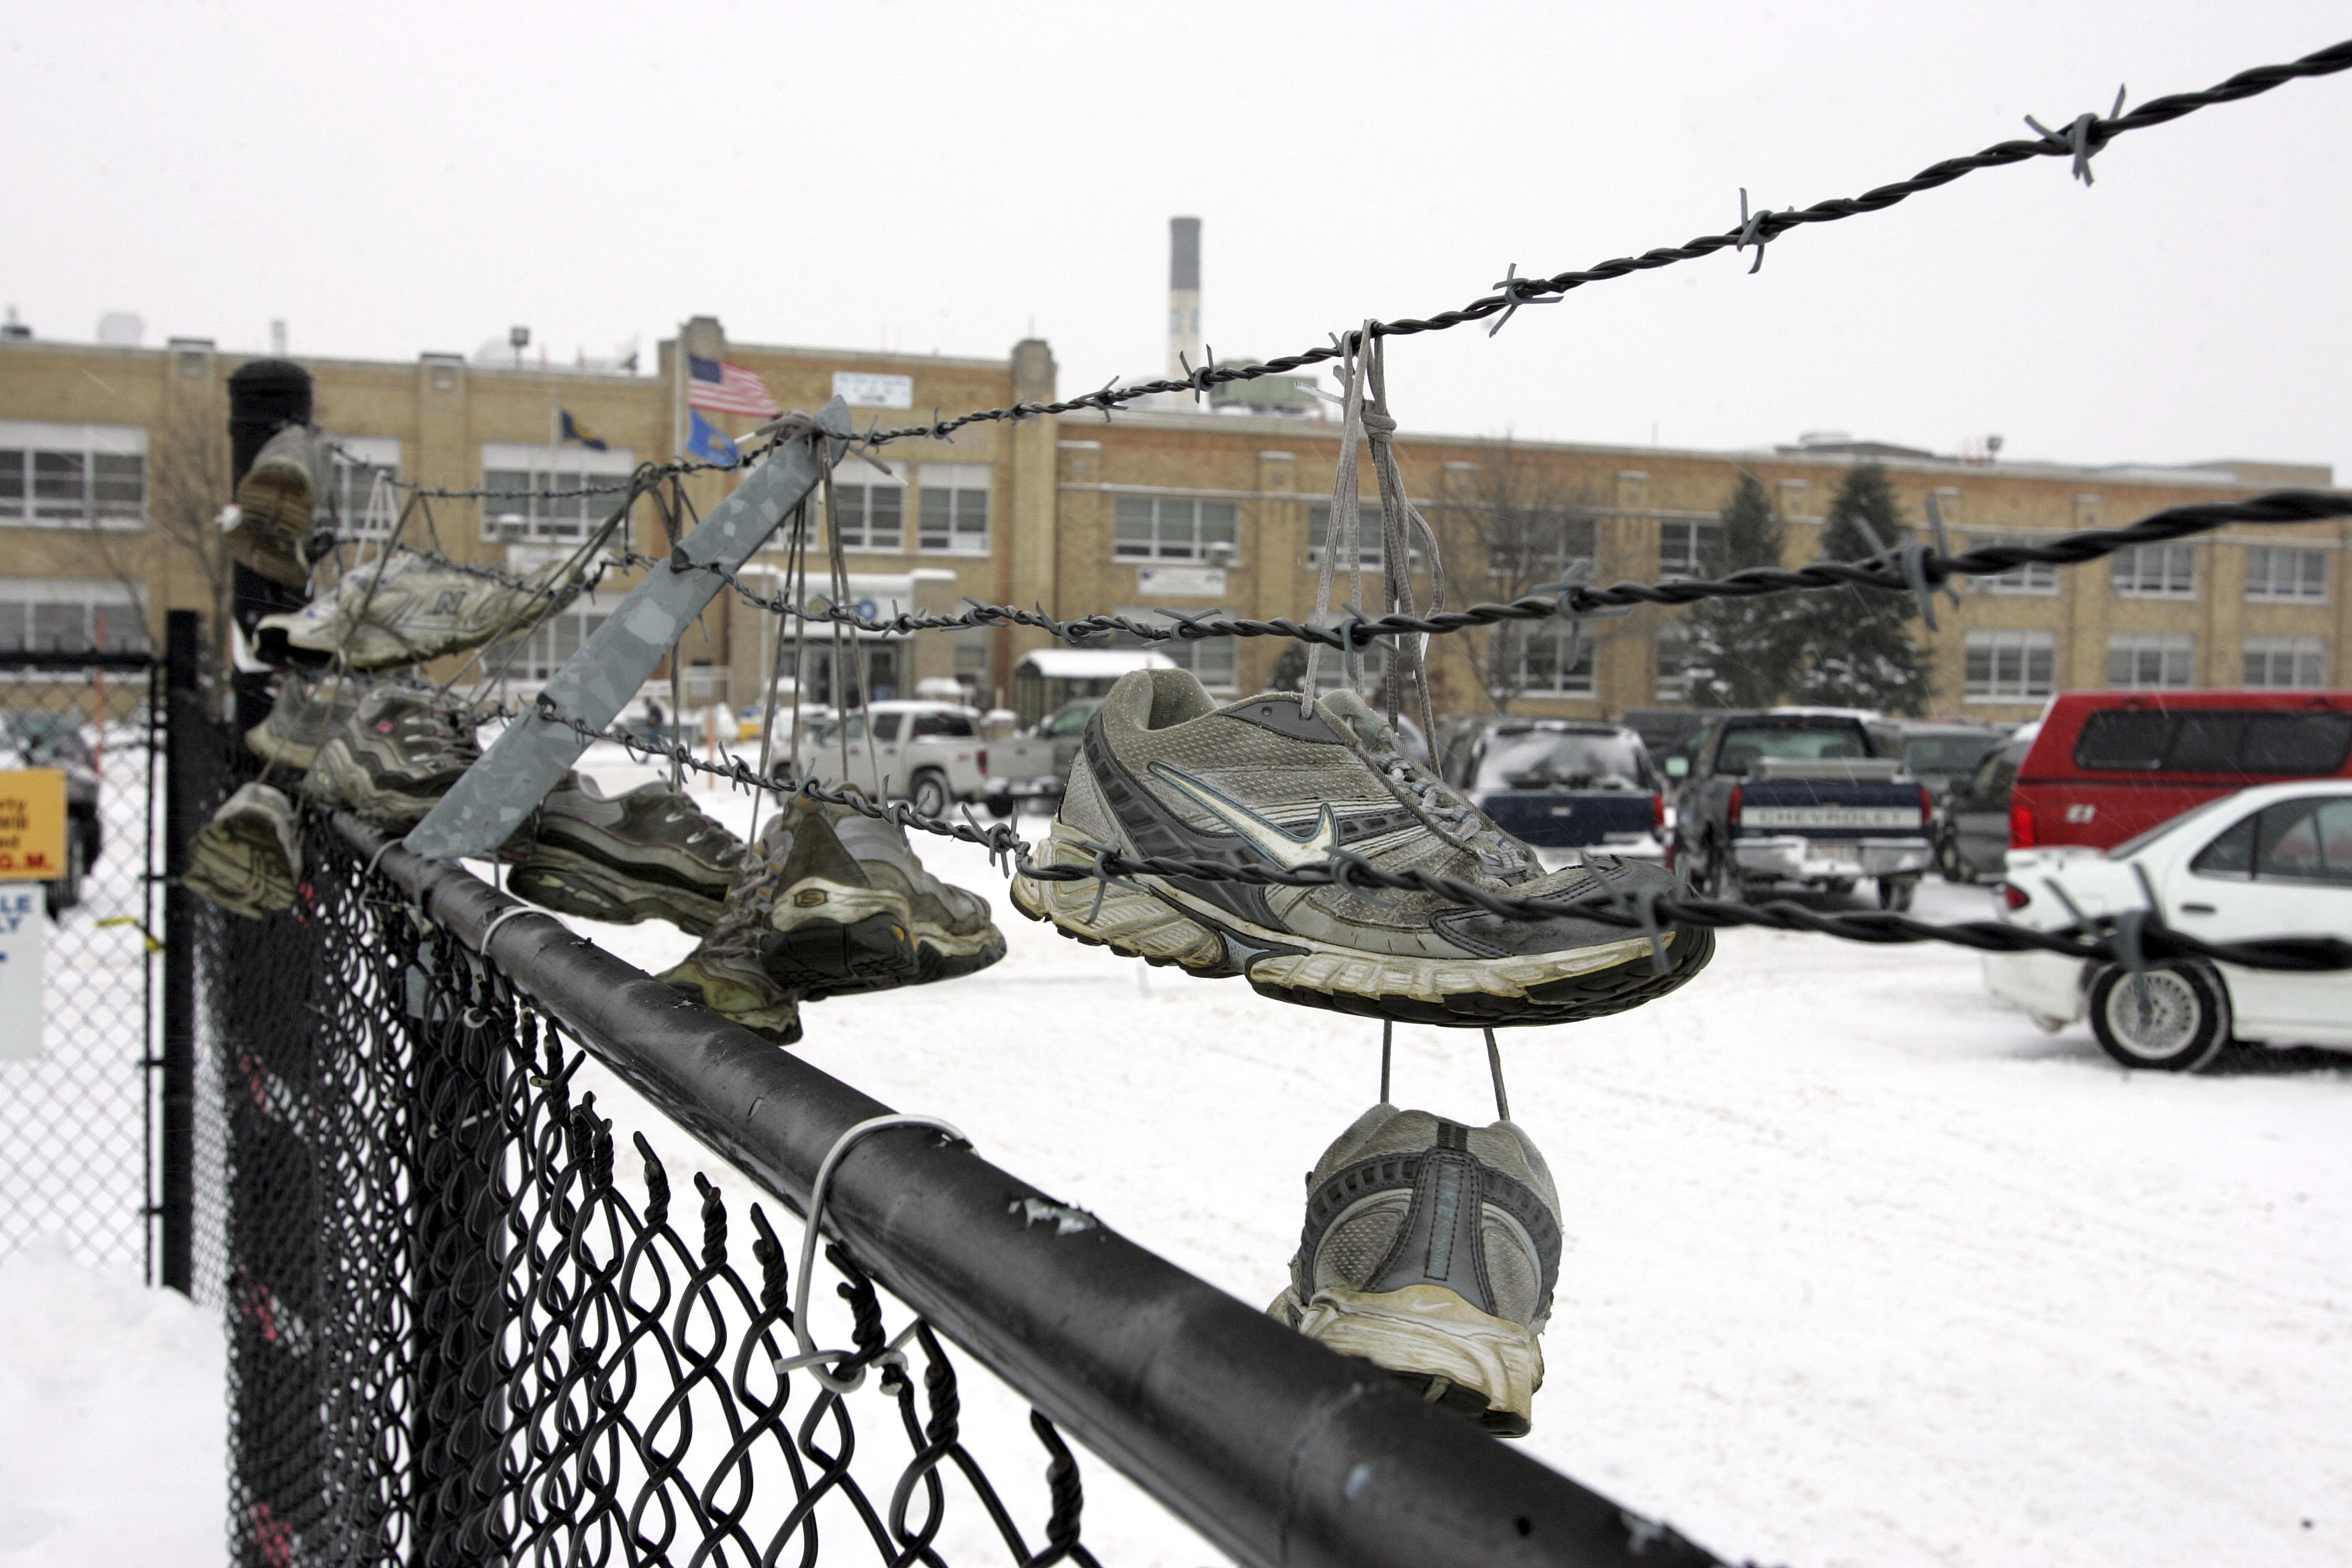 Shoes of autoworkers are hung on a fence at the GM plant in Janesville, Wisconsin, after the last vehicle, a black Chevy Tahoe, rolled off the assembly line December 23, 2008